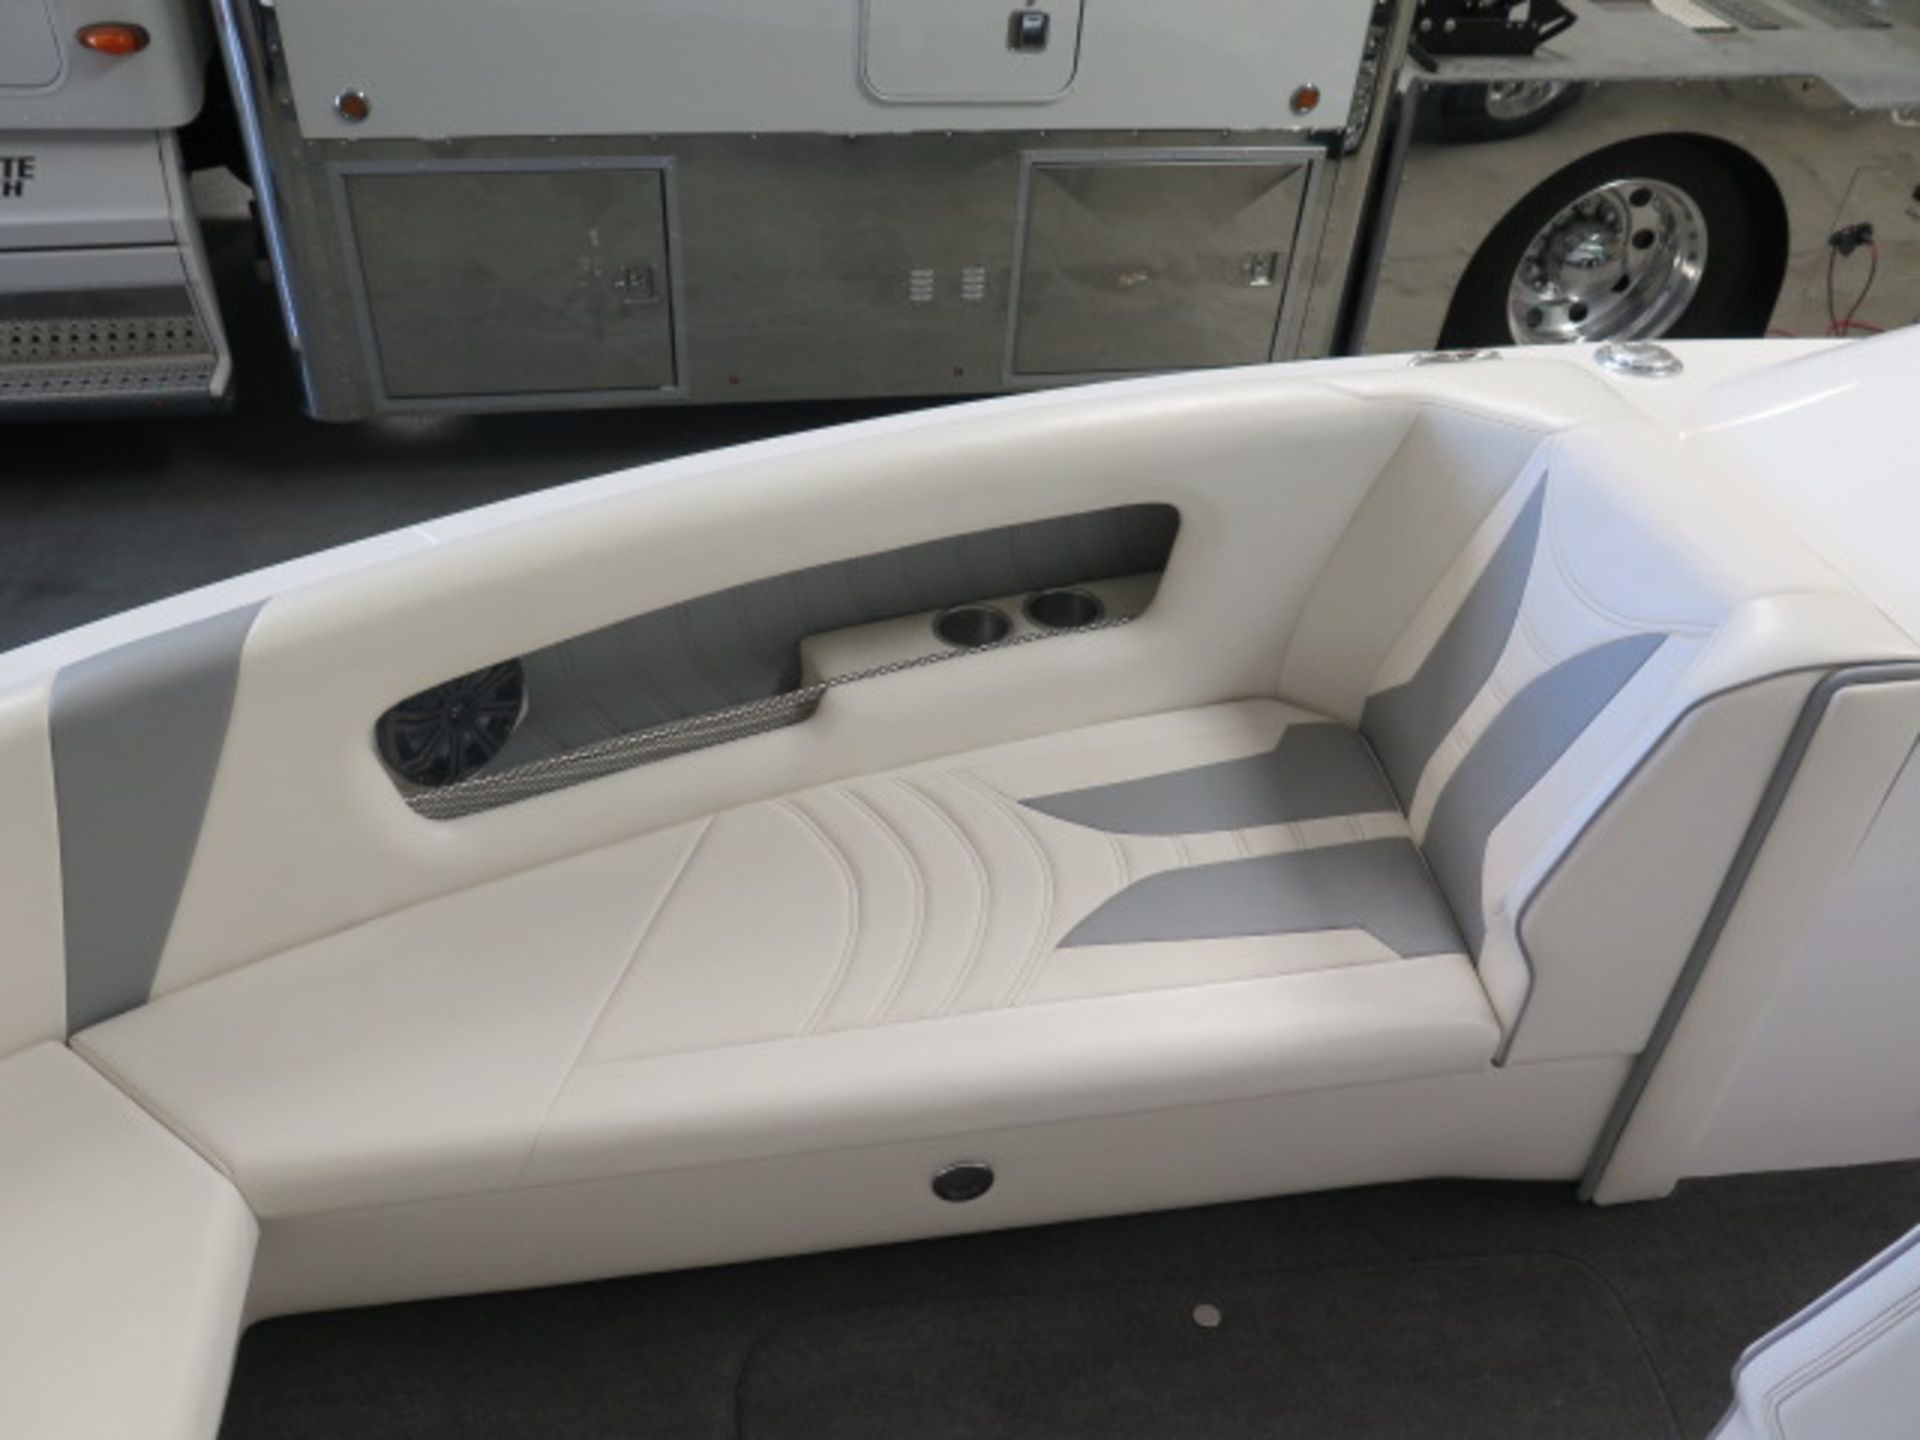 2020 Laveycraft 24' V-Bottom Open Bow Boat w/ Custon Martinez Interior, Boostpower 675Hp, SOLD AS IS - Image 13 of 40